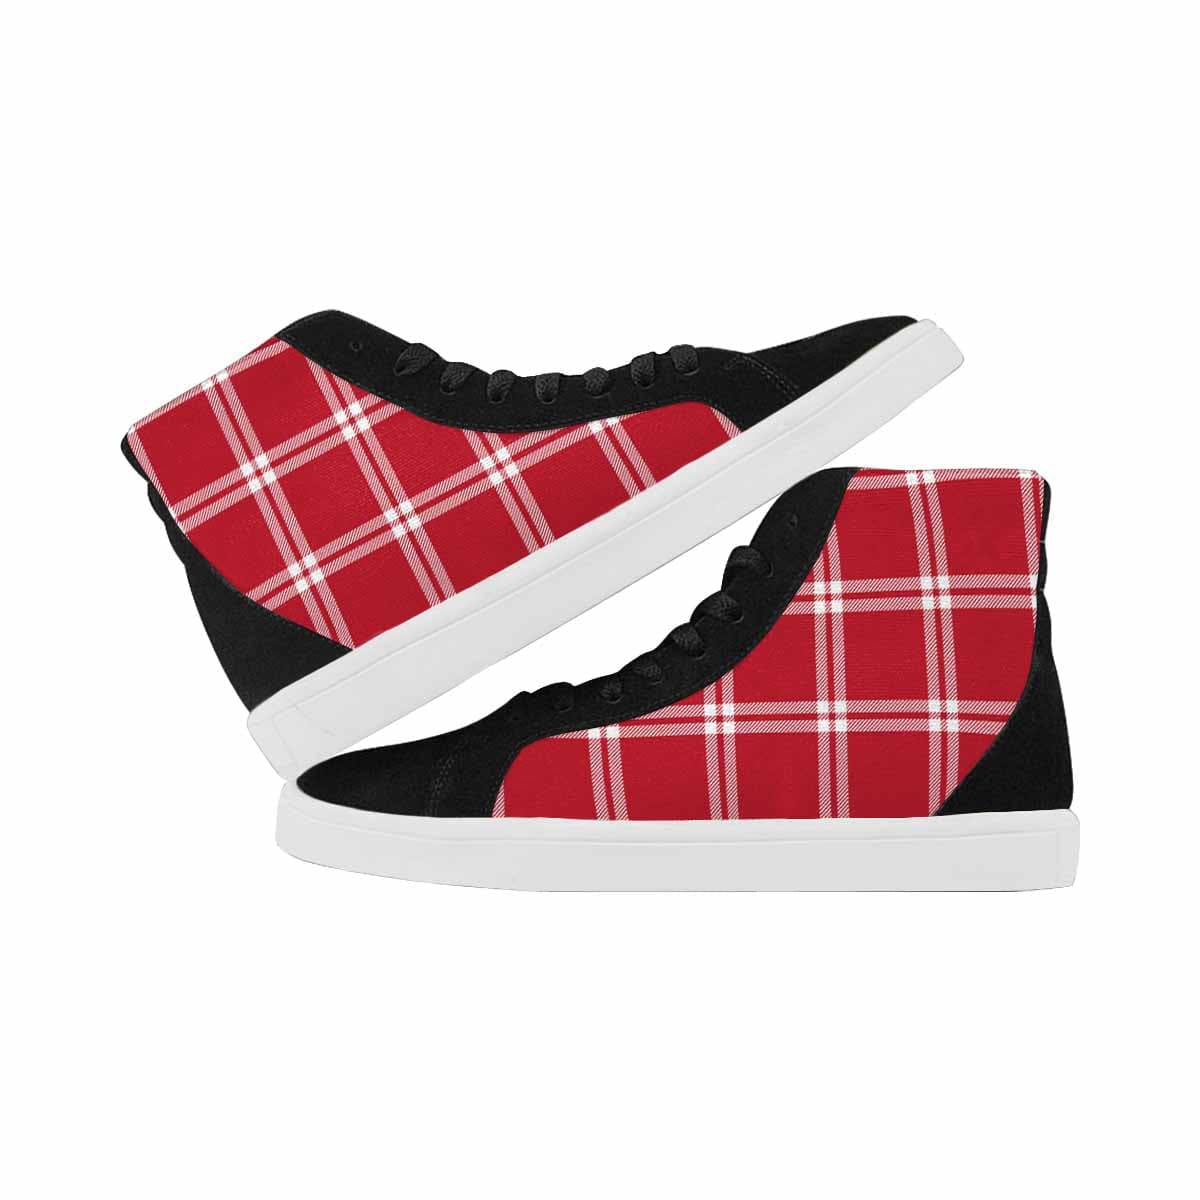 Sneakers For Women, Buffalo Plaid Red And White - High Top Sports Shoes-3